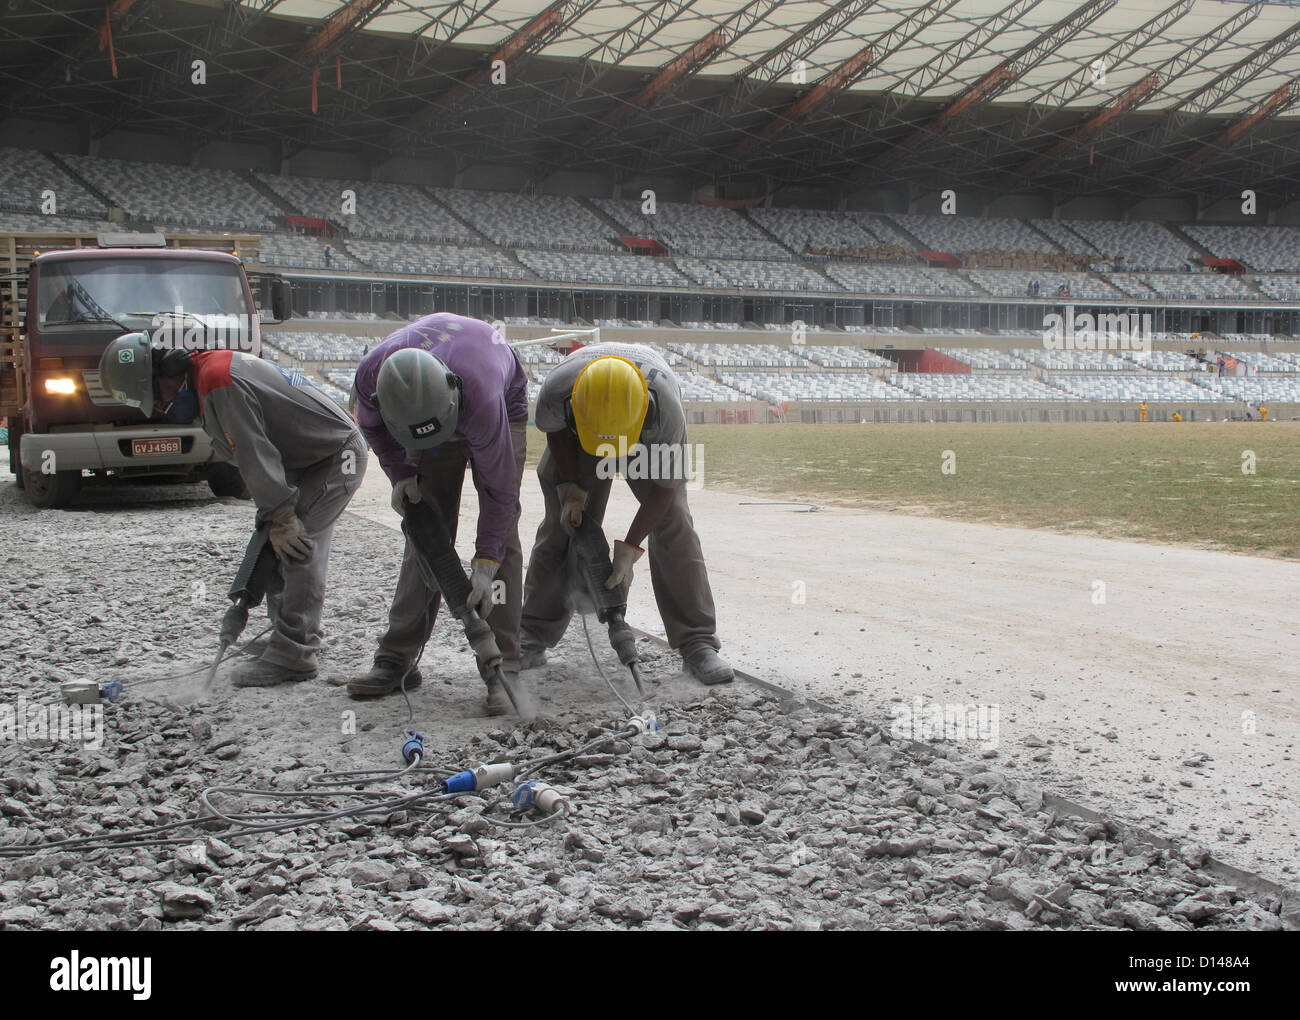 Construction works inside the Mineirao stadium in Belo Horizonte, Brazil, 03 December 2012. The stadium was established in 1965 and is currently undergoing a major renovation. Once finished it will have a capacity of 62,000 spectators and is one of the host stadiums of the FIFA Confederations Cup 2013 and the FIFA World Cup 2014. Photo: Arne Richter/dpa Stock Photo